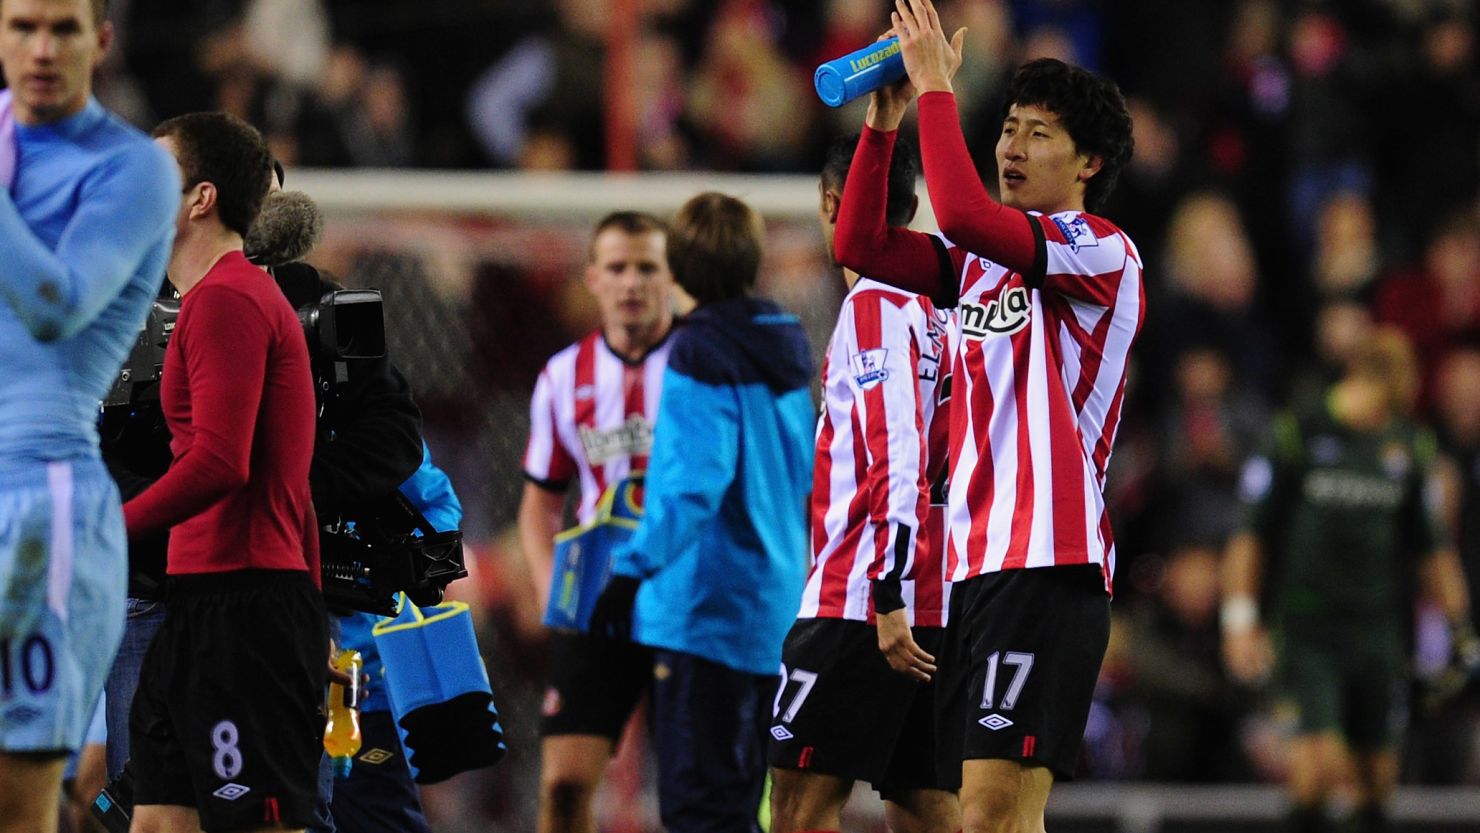 South Korean striker Ji Dong-Won (right) celebrates after Sunderland's dramatic 1-0 home win over Manchester City.